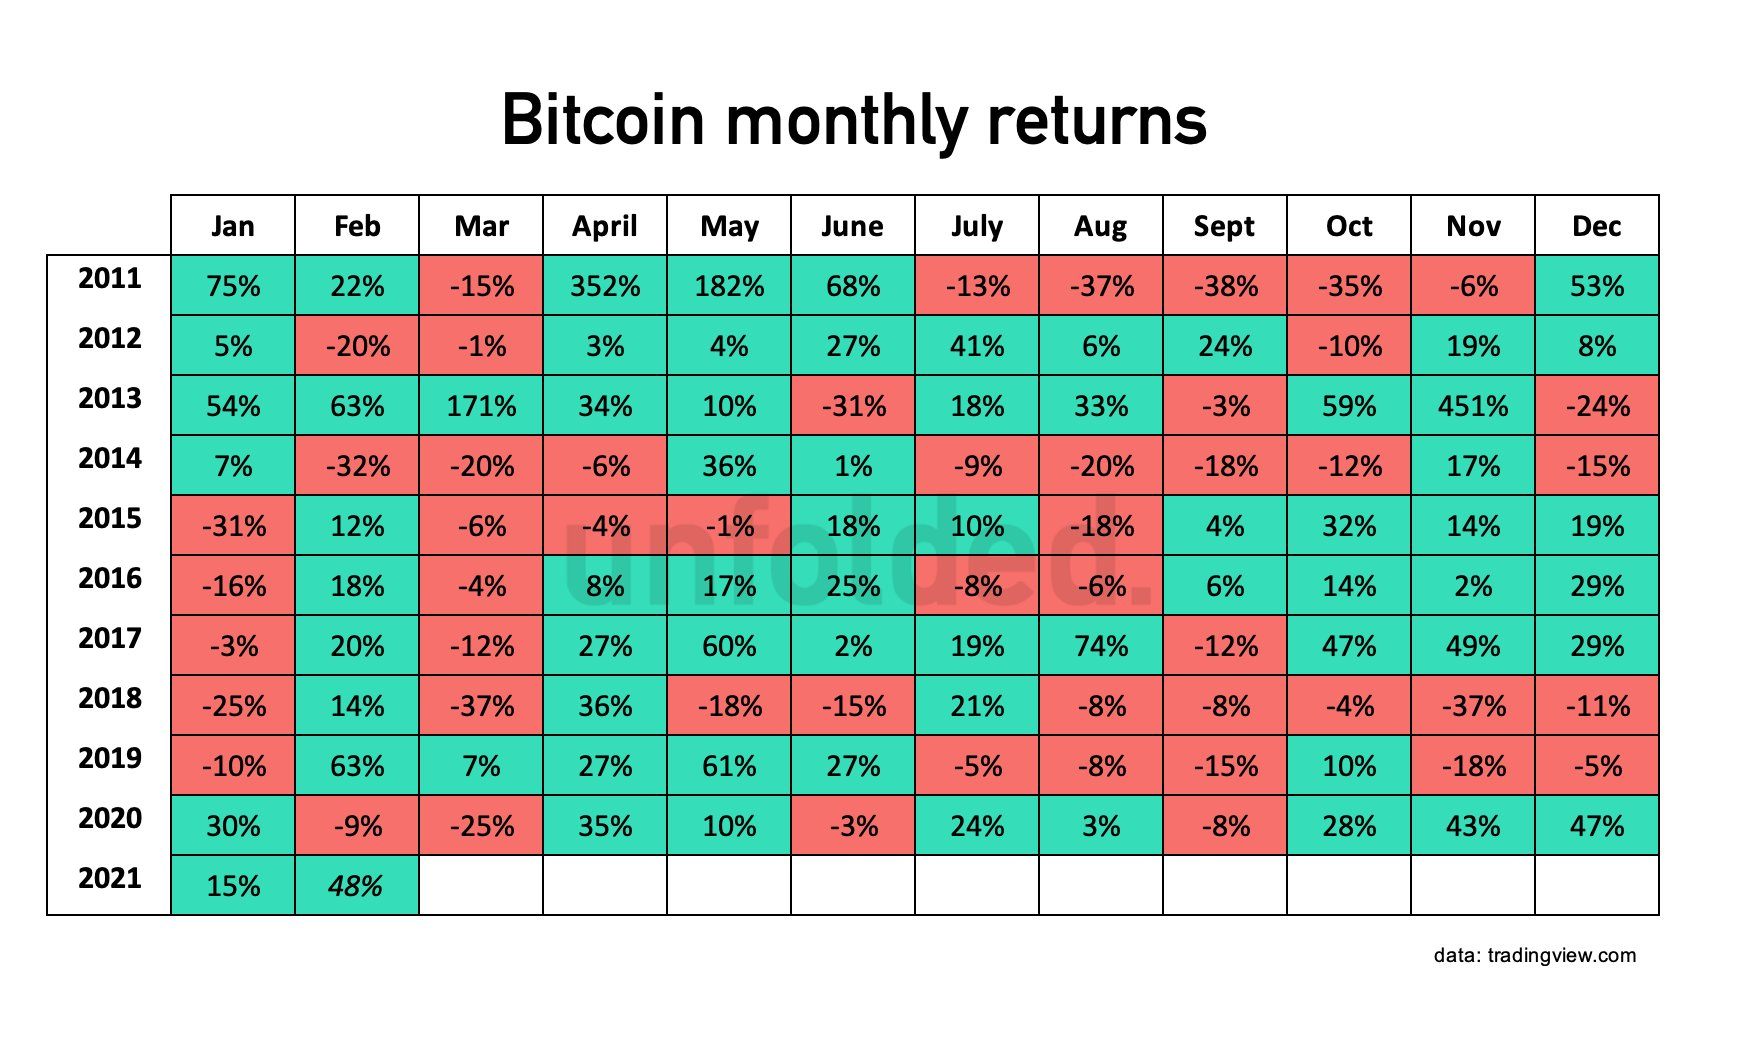 @jrcornel/march-is-usually-a-scary-month-for-bitcoin-but-it-may-not-be-this-year